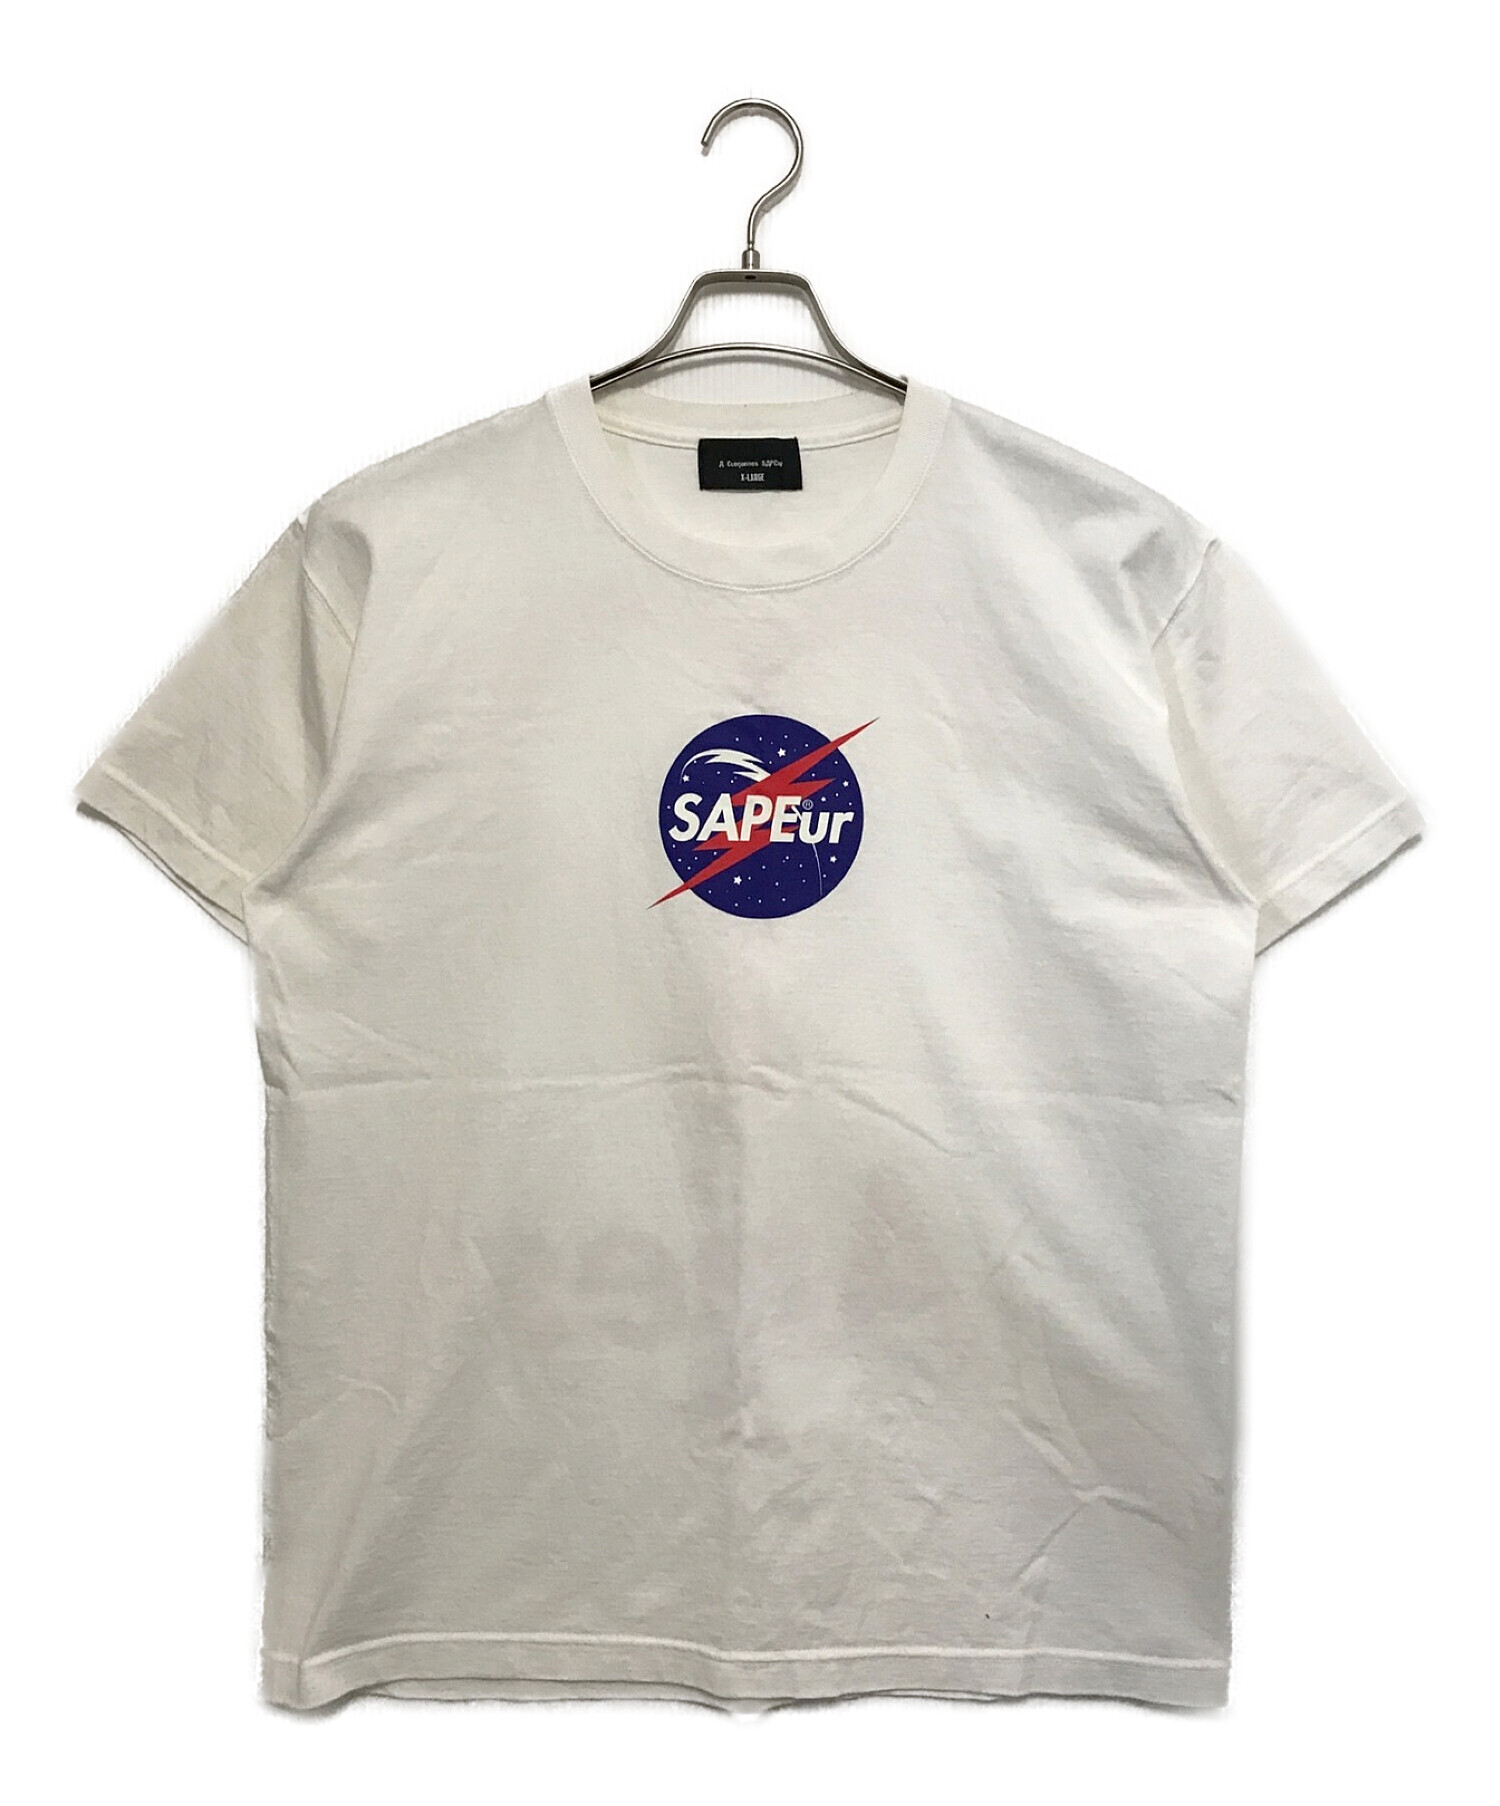 sapeur サプール Tシャツ ペイズリー XL